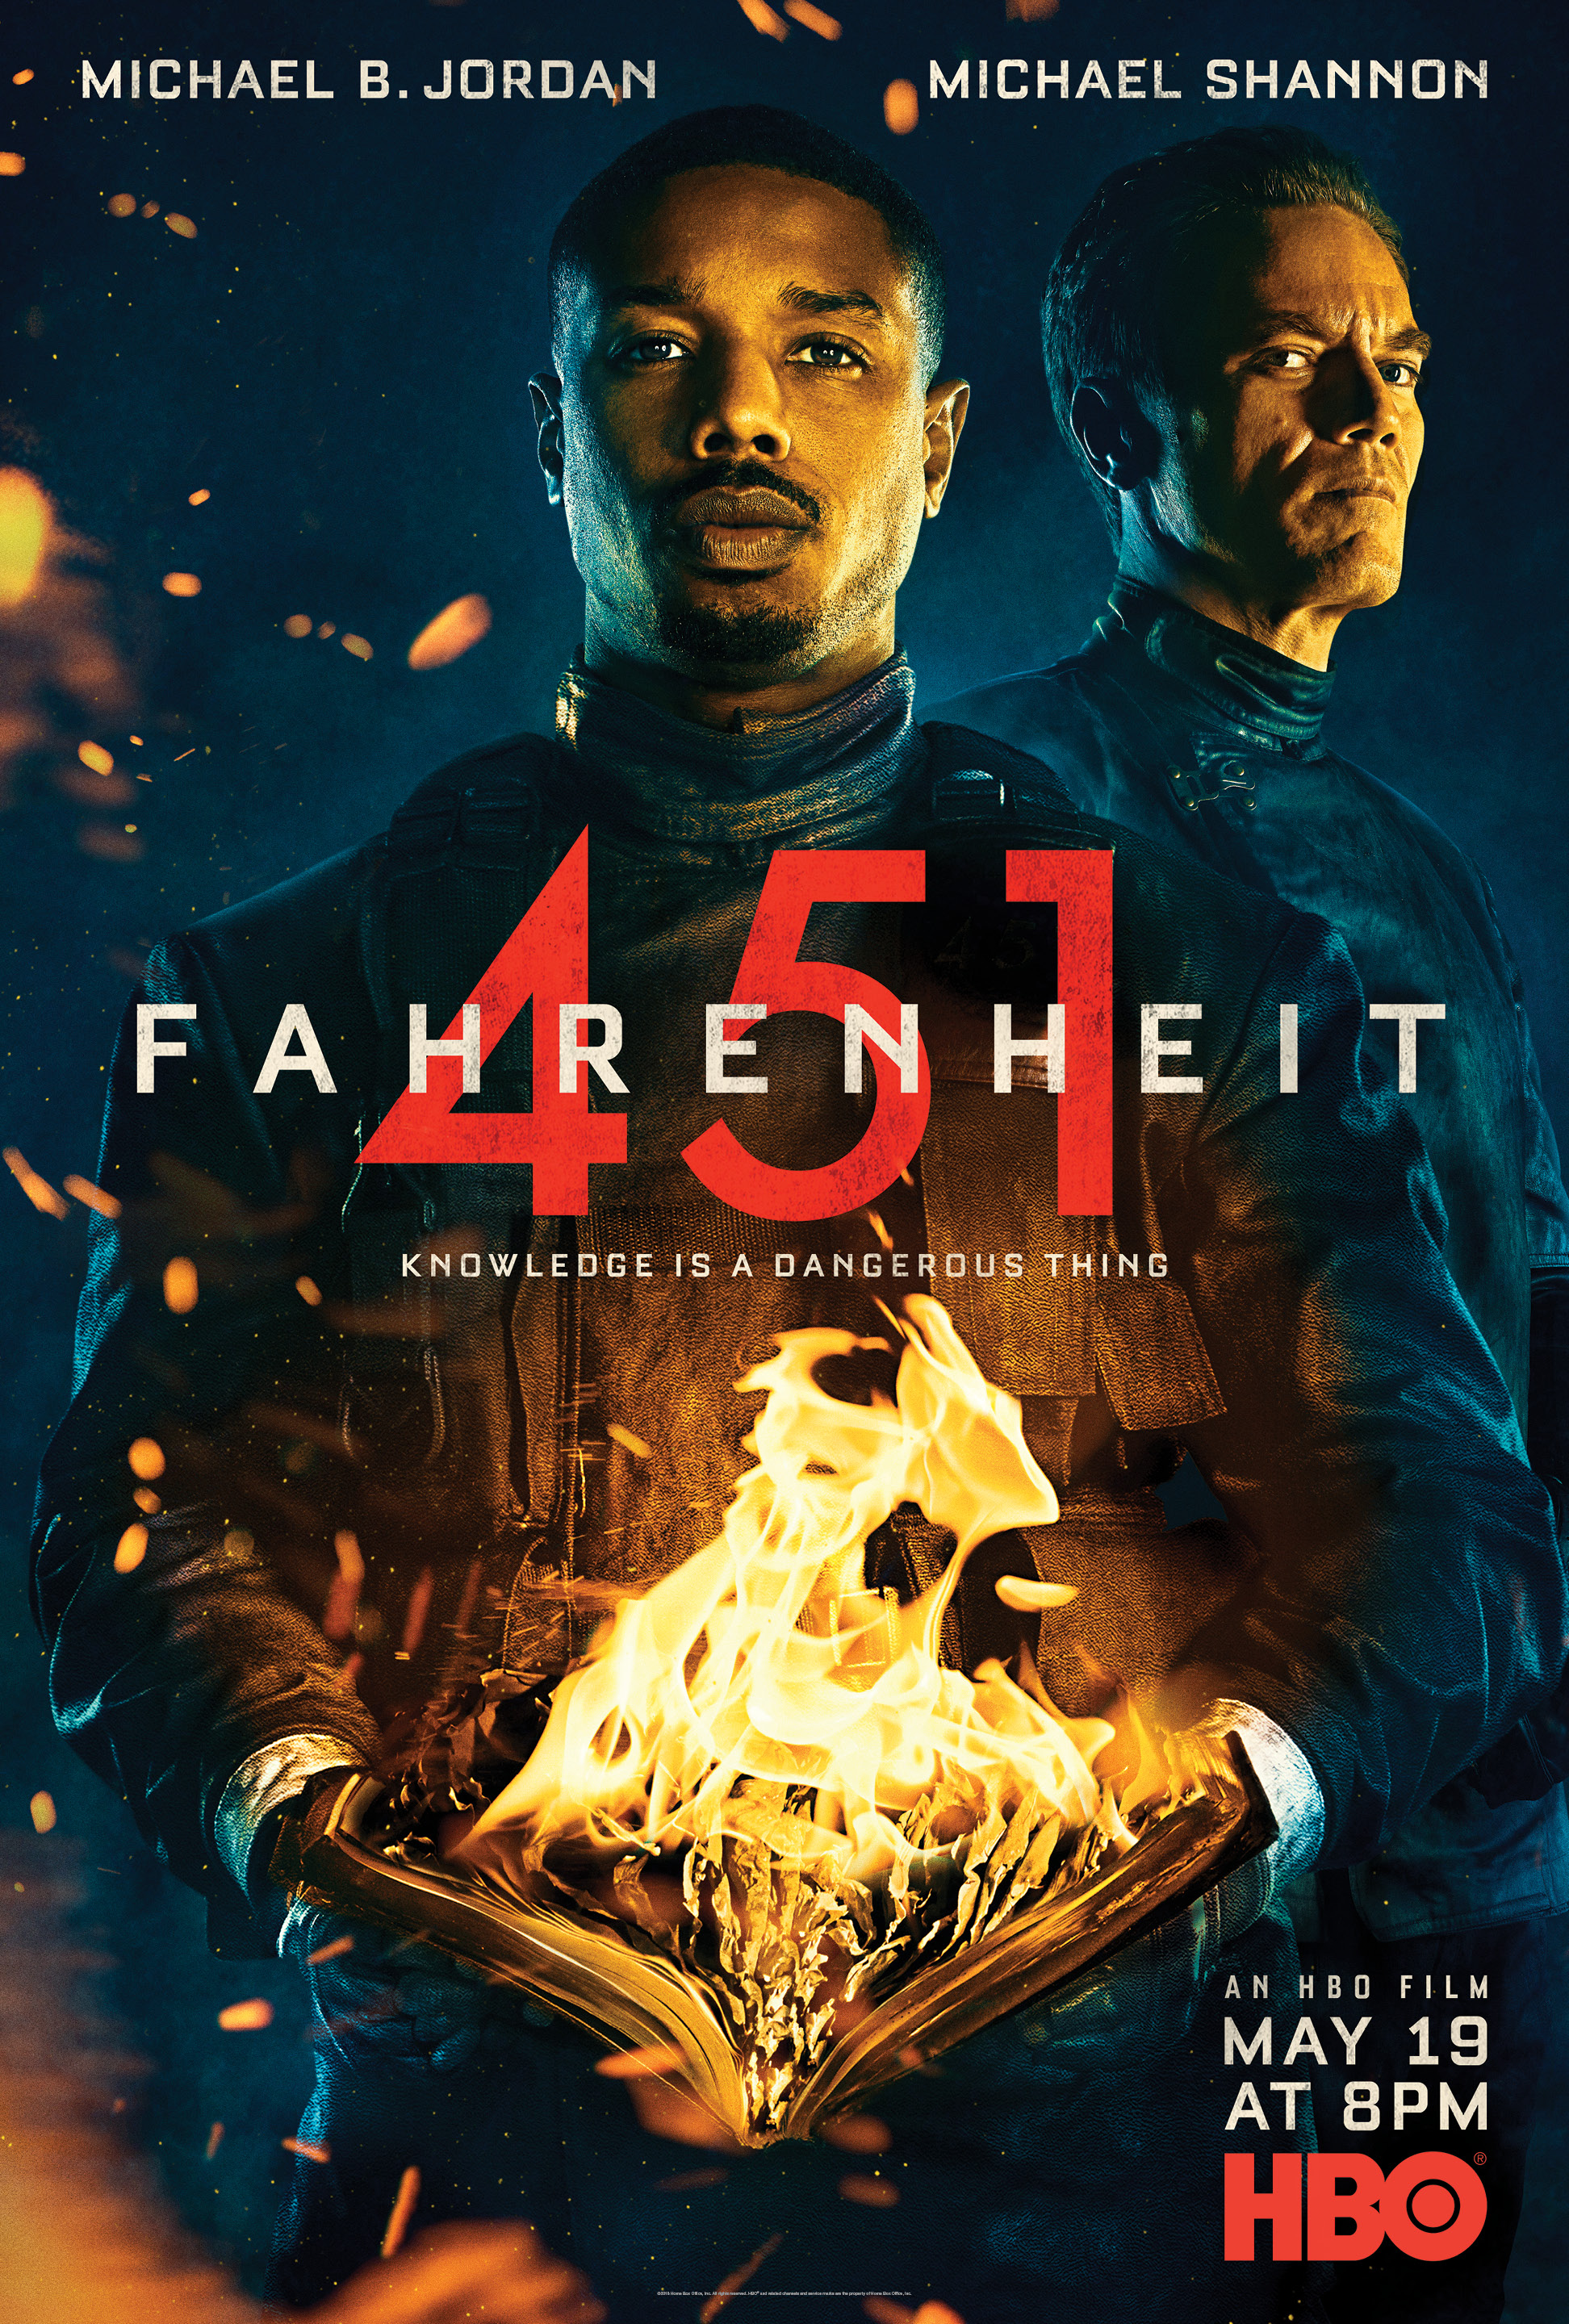 Fahrenheit 451 film review Cannes 2018: Michael B Jordan and Michael Shannon take on a classic